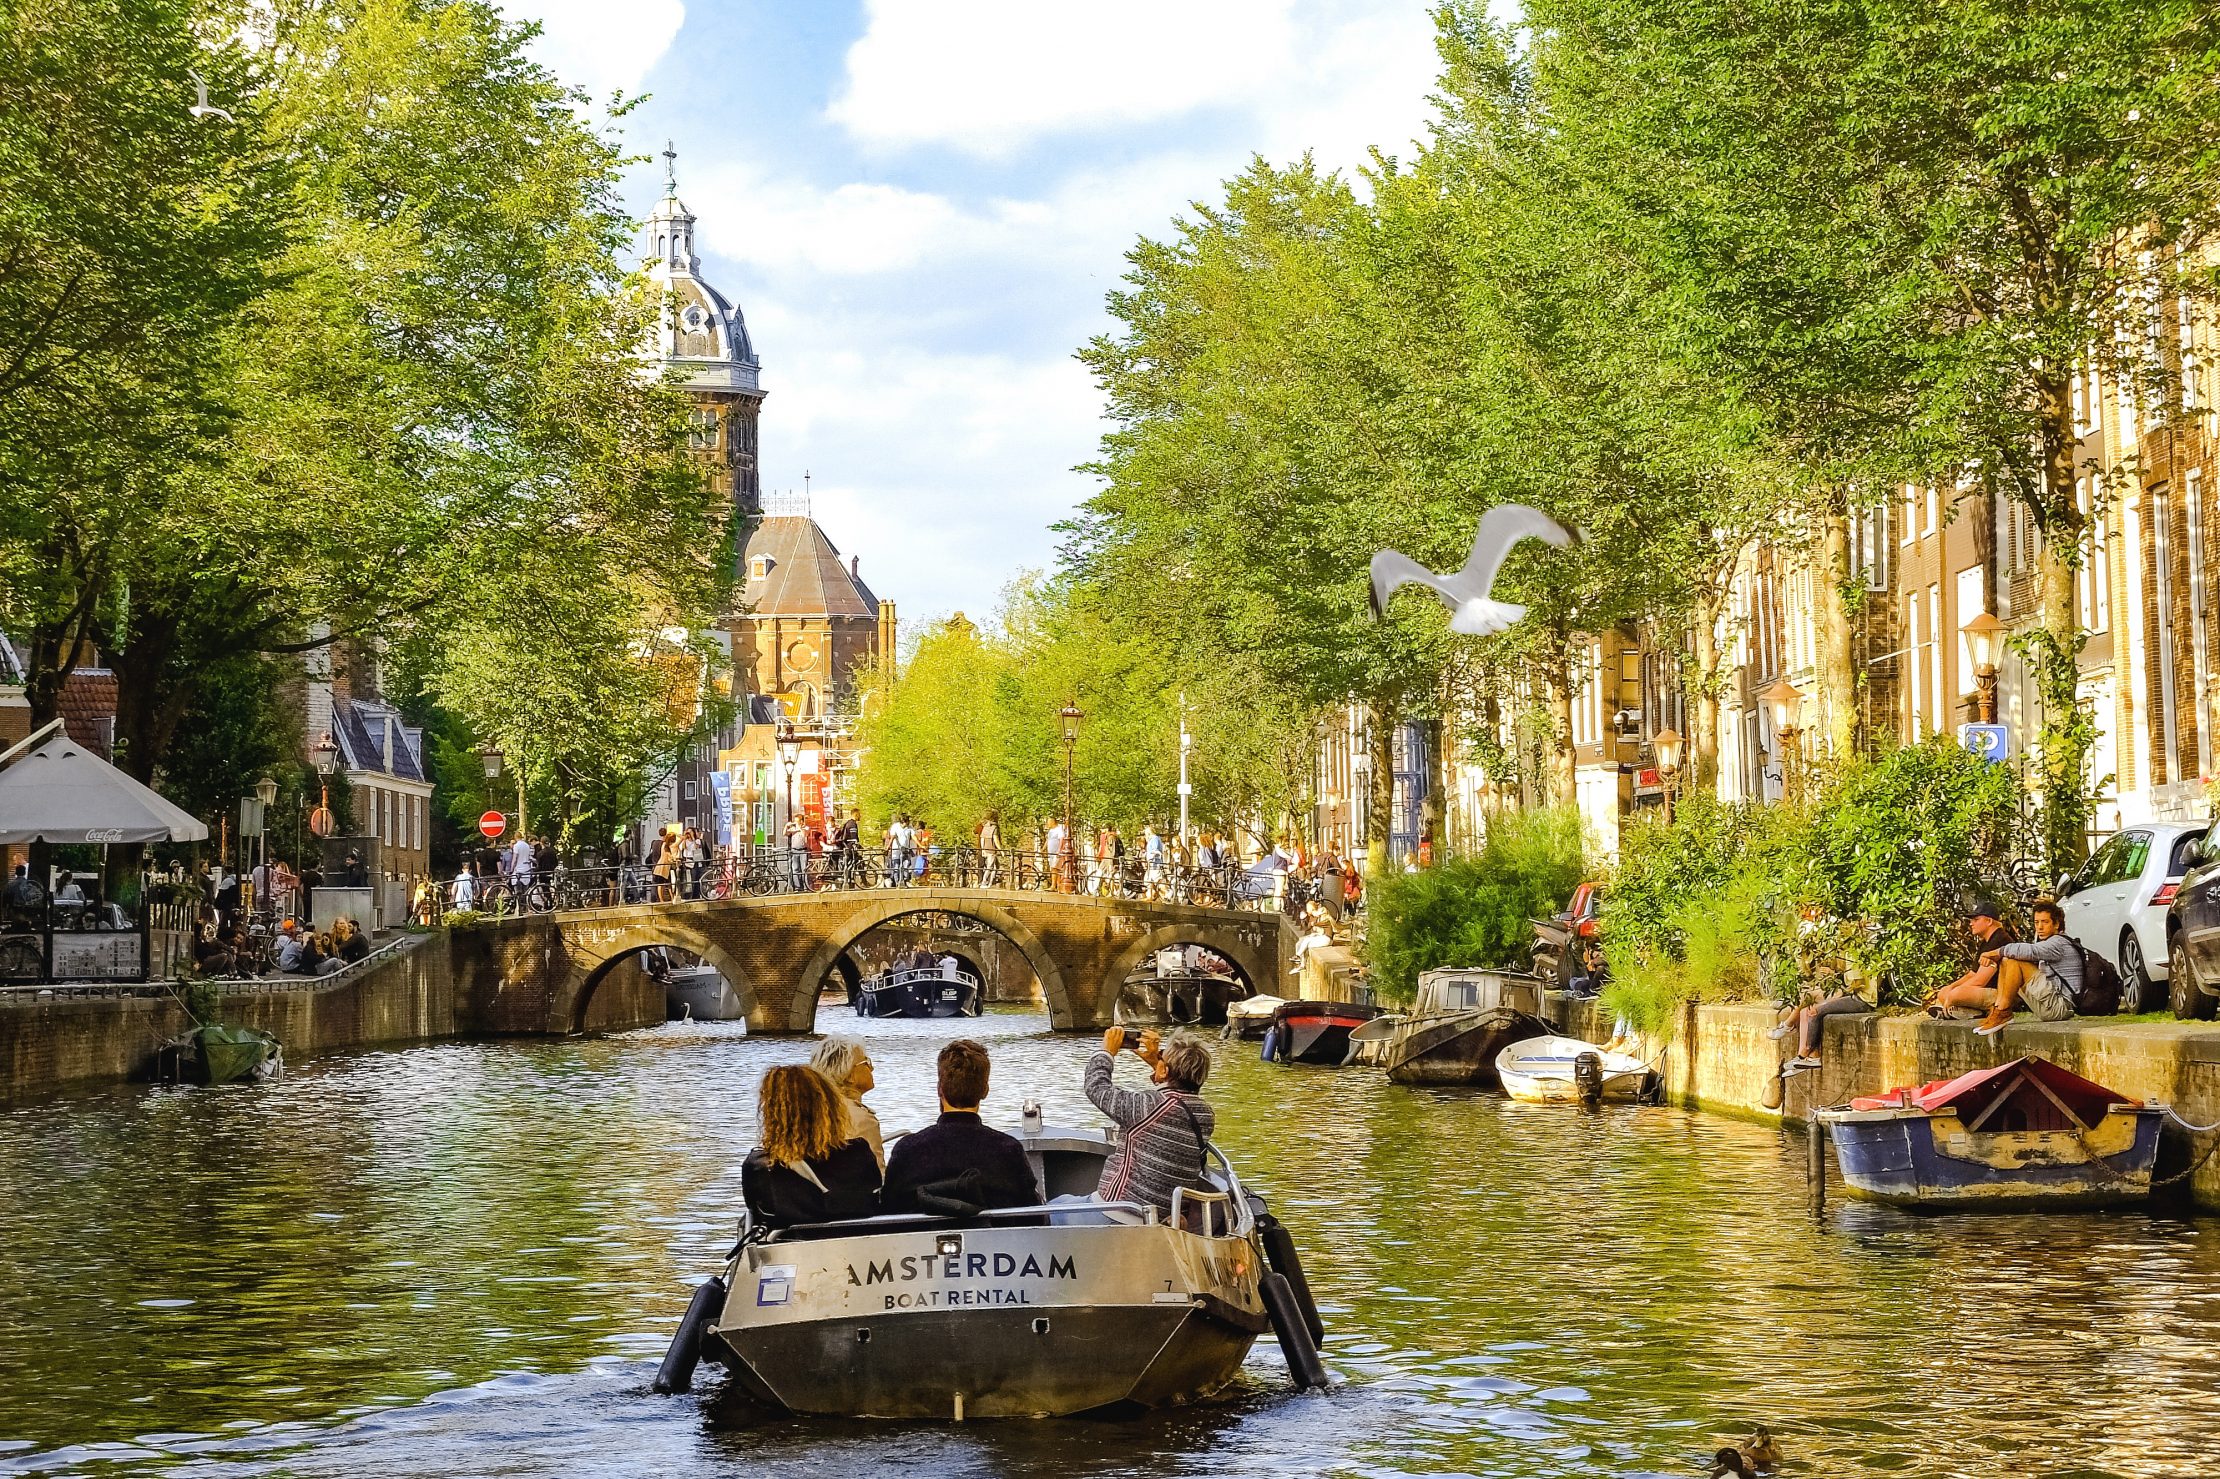 Why visit Amsterdam and keep on coming back